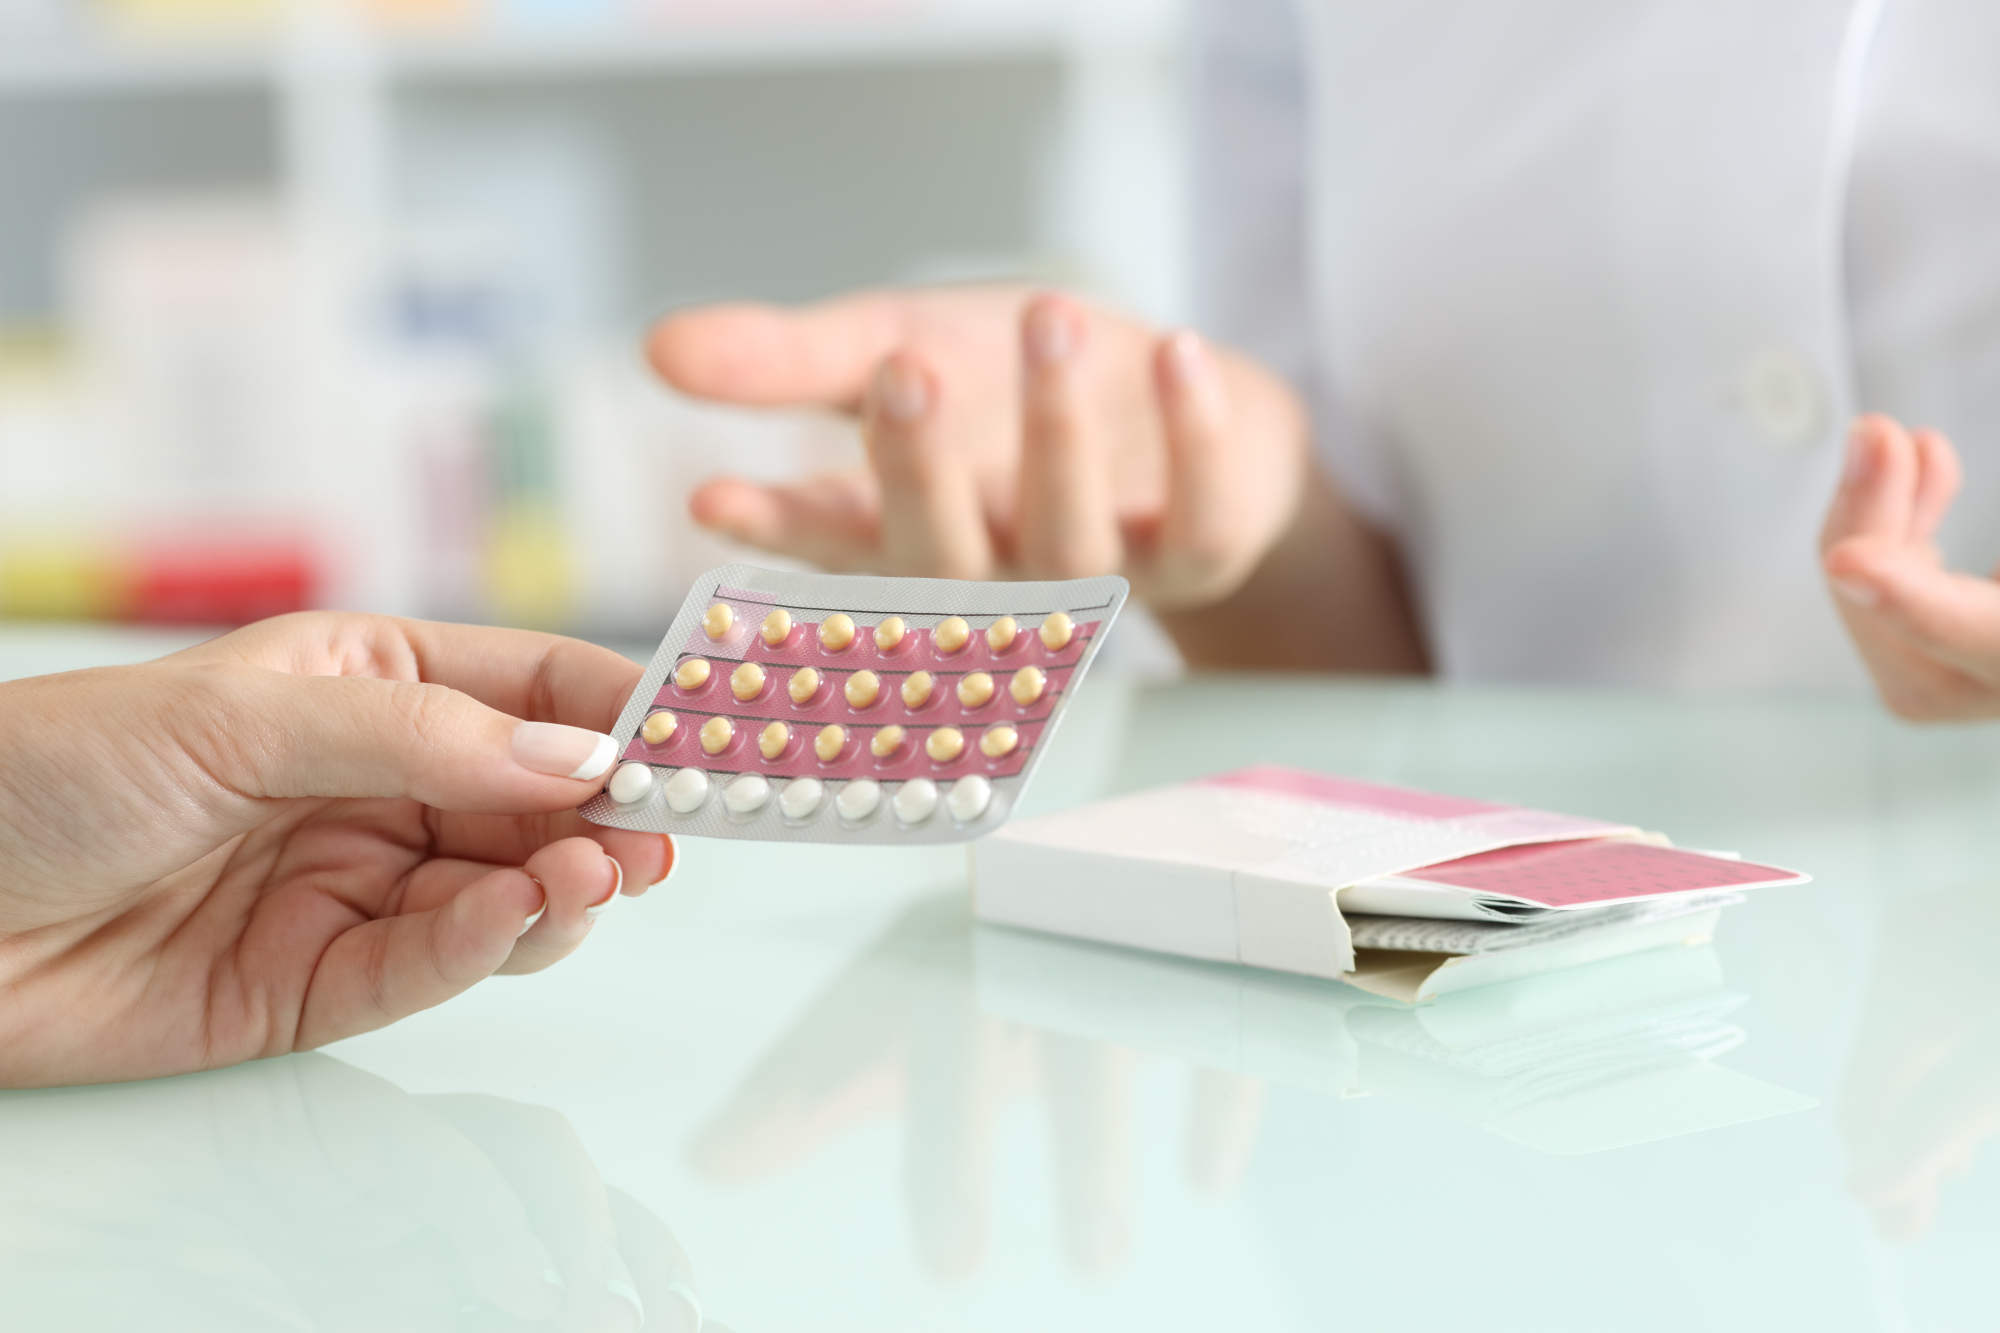 Doctors say more Japanese women should be informed about how contraceptive pills can reduce pain during menstruation and also prevent conditions that can cause infertility. | GETTY IMAGES